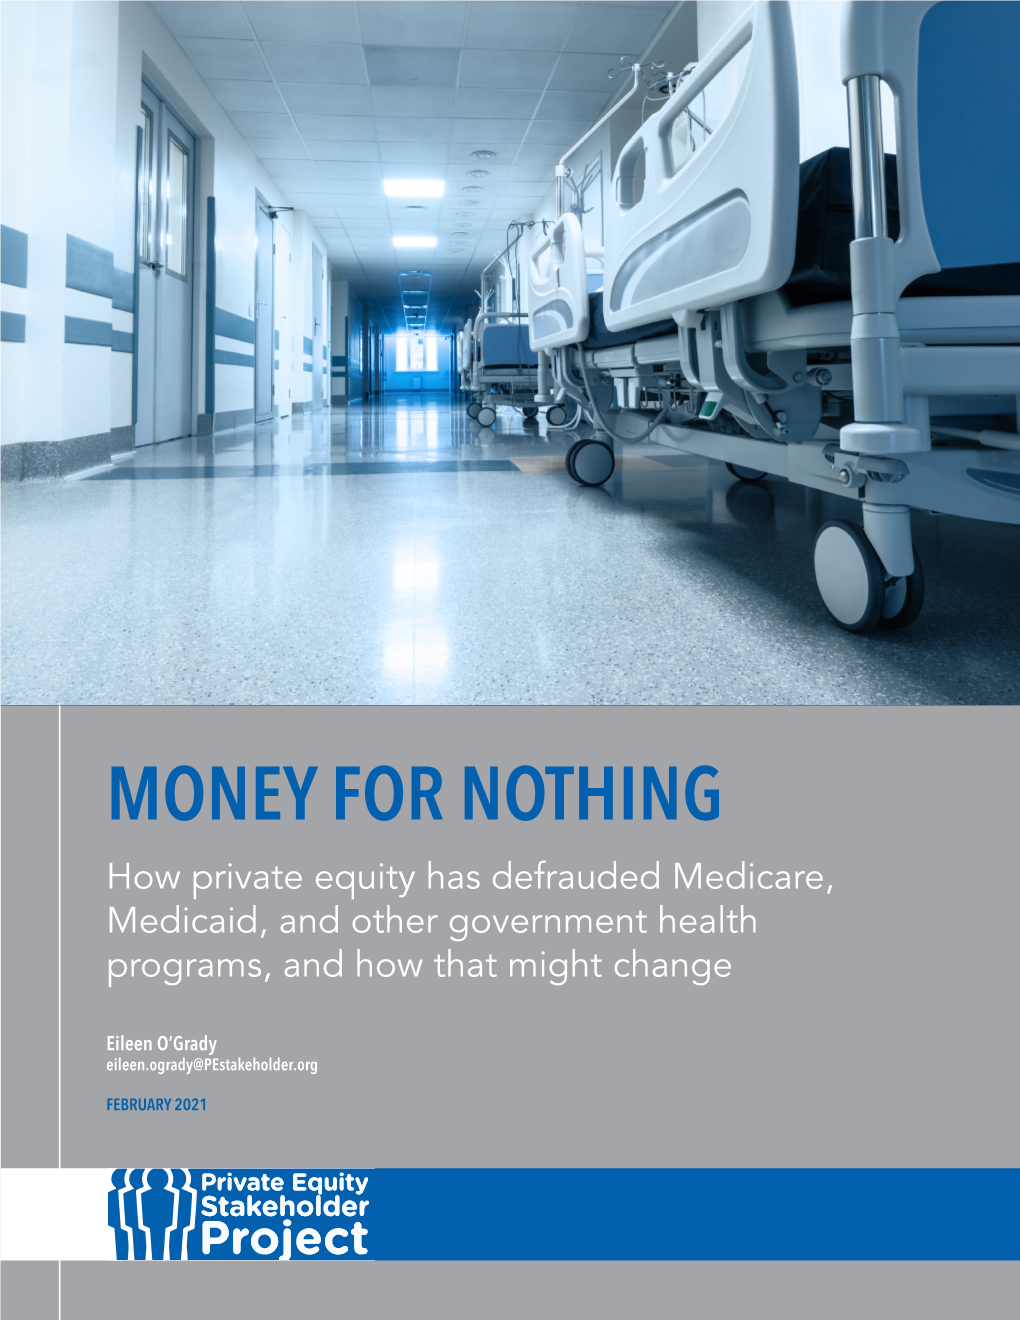 Money for Nothing: How Private Equity Has Defrauded Medicare